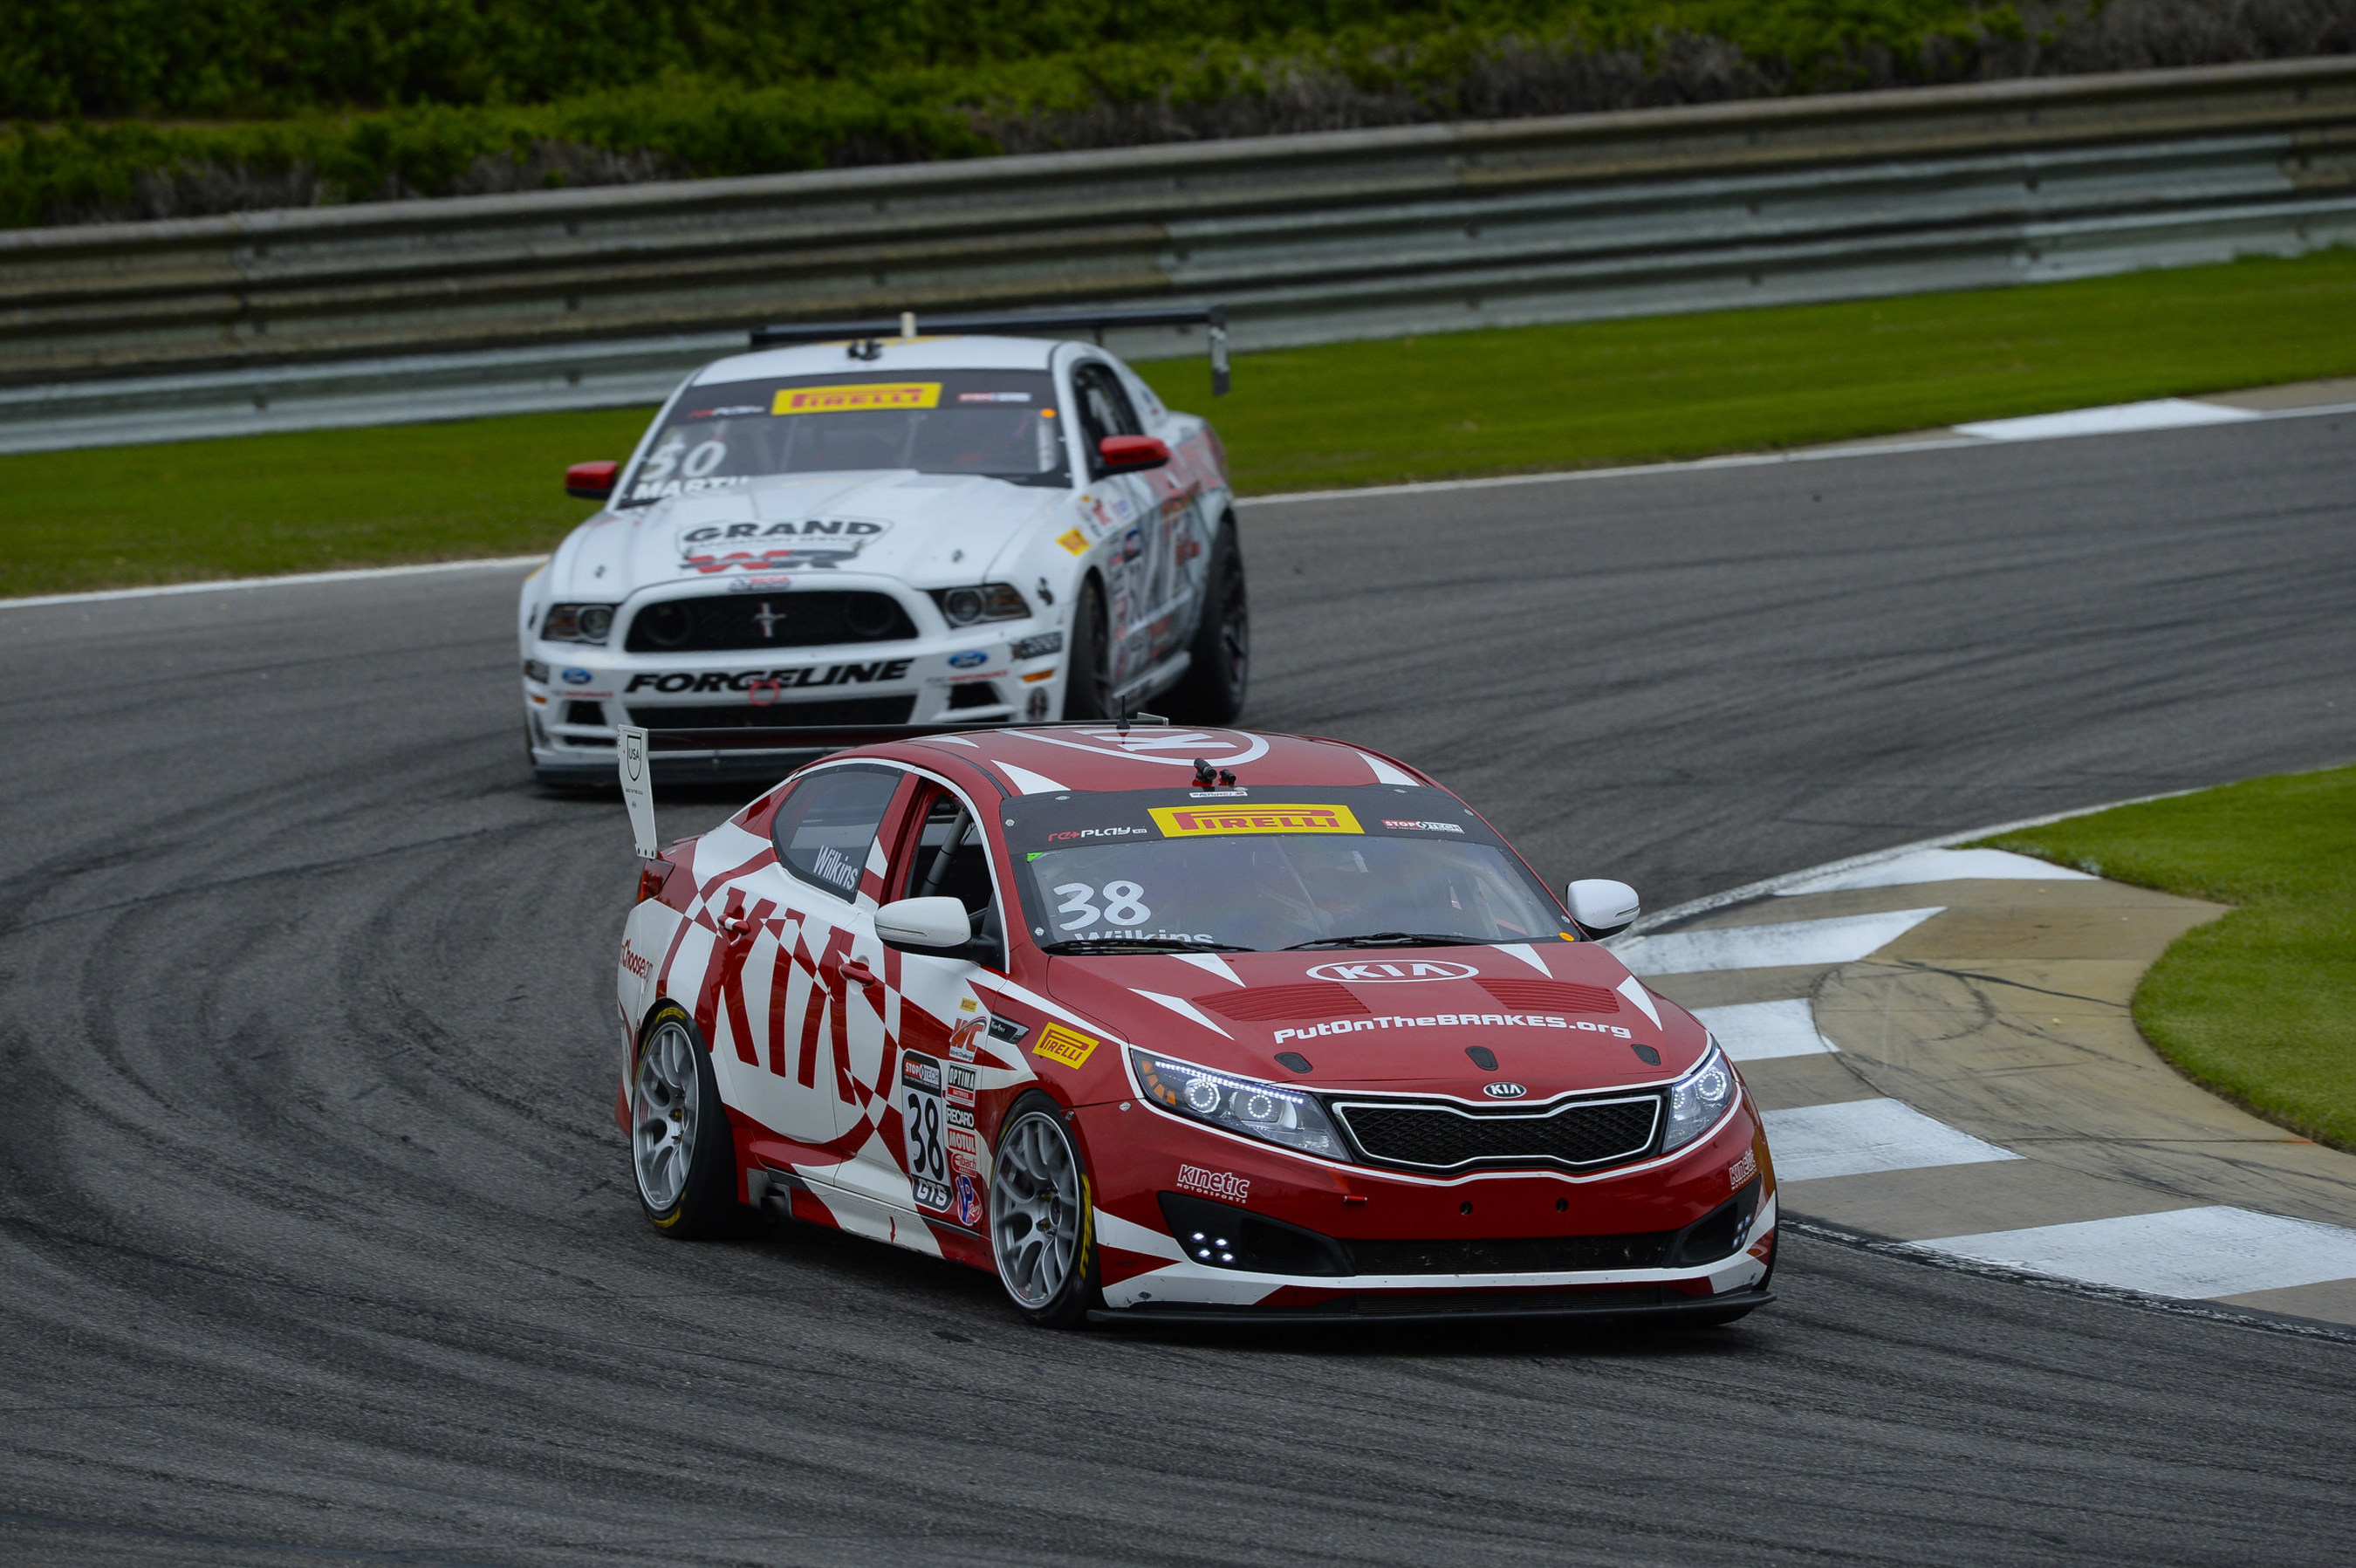 Kia Racing scores back-to-back podium finishes in rounds five and six of Pirelli World Challenge at Barber Motorsports Park